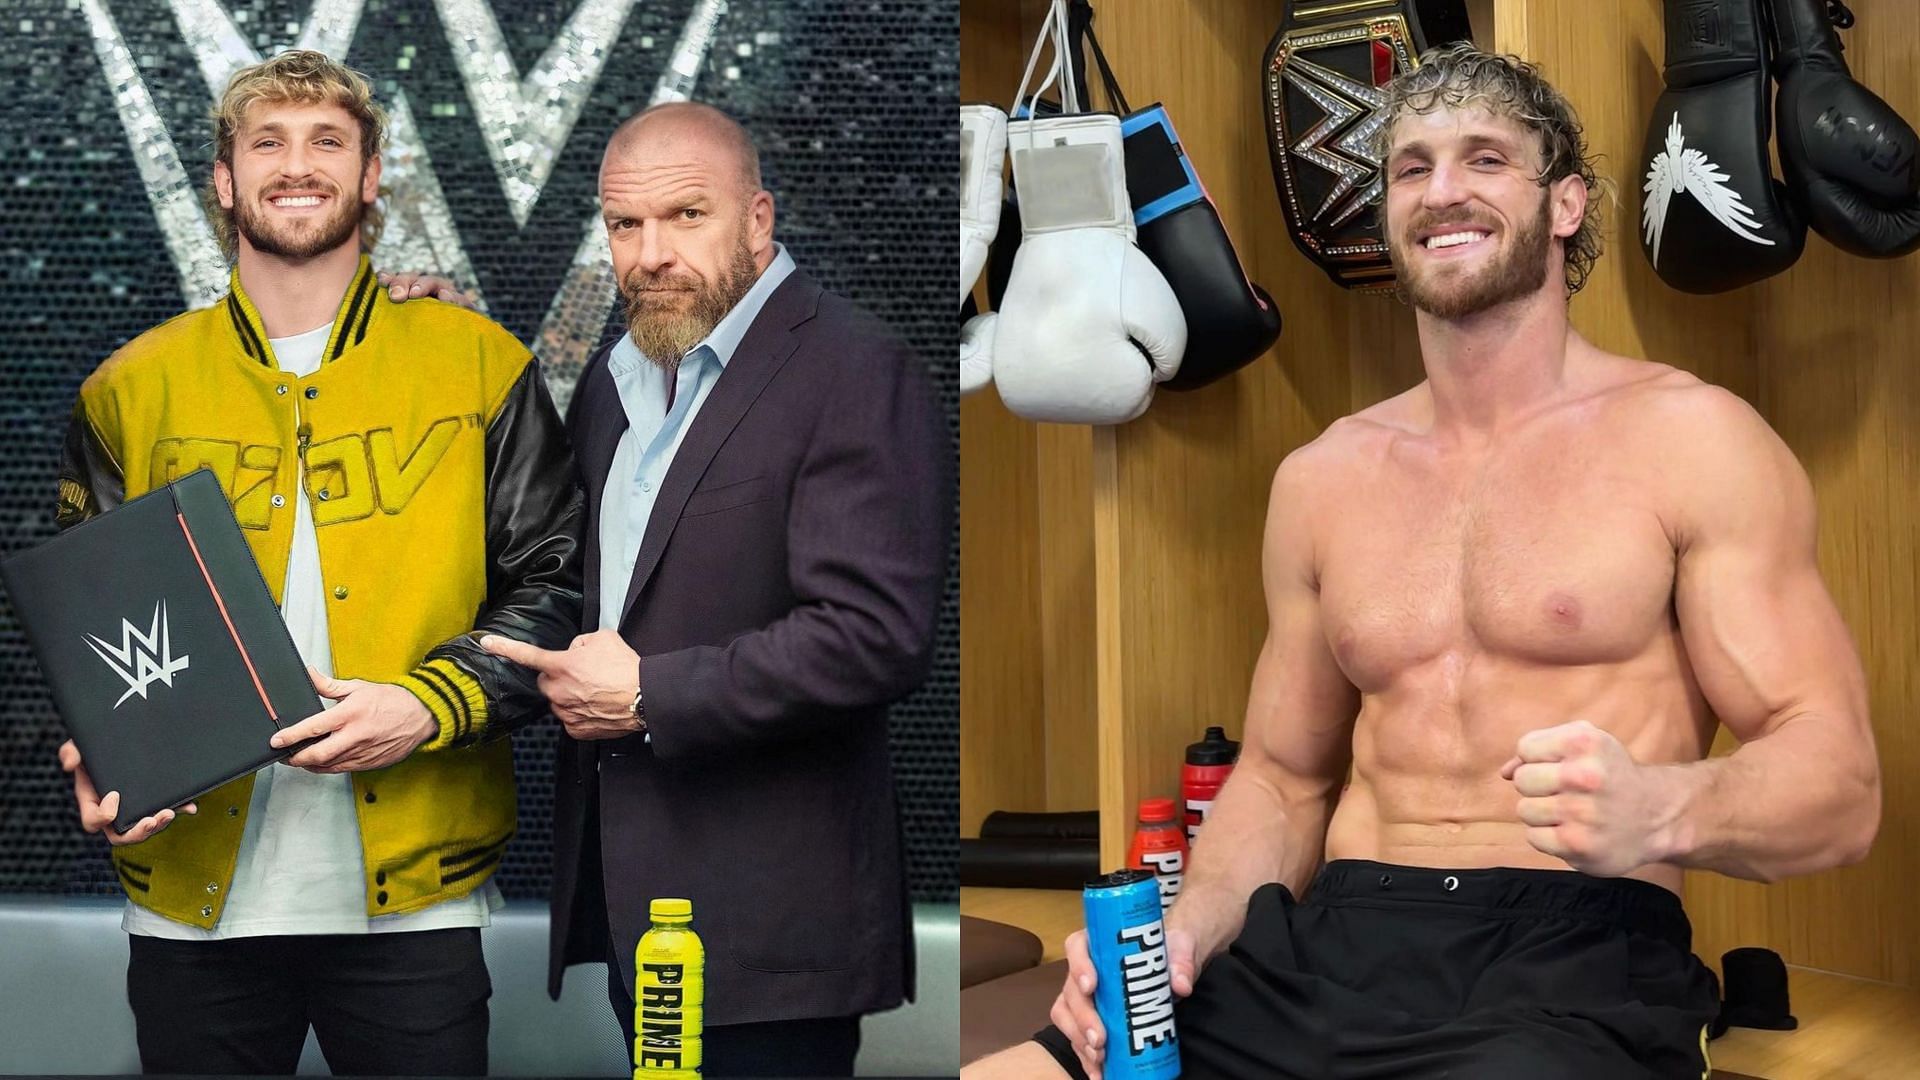 Logan Paul recently signed a new WWE contract